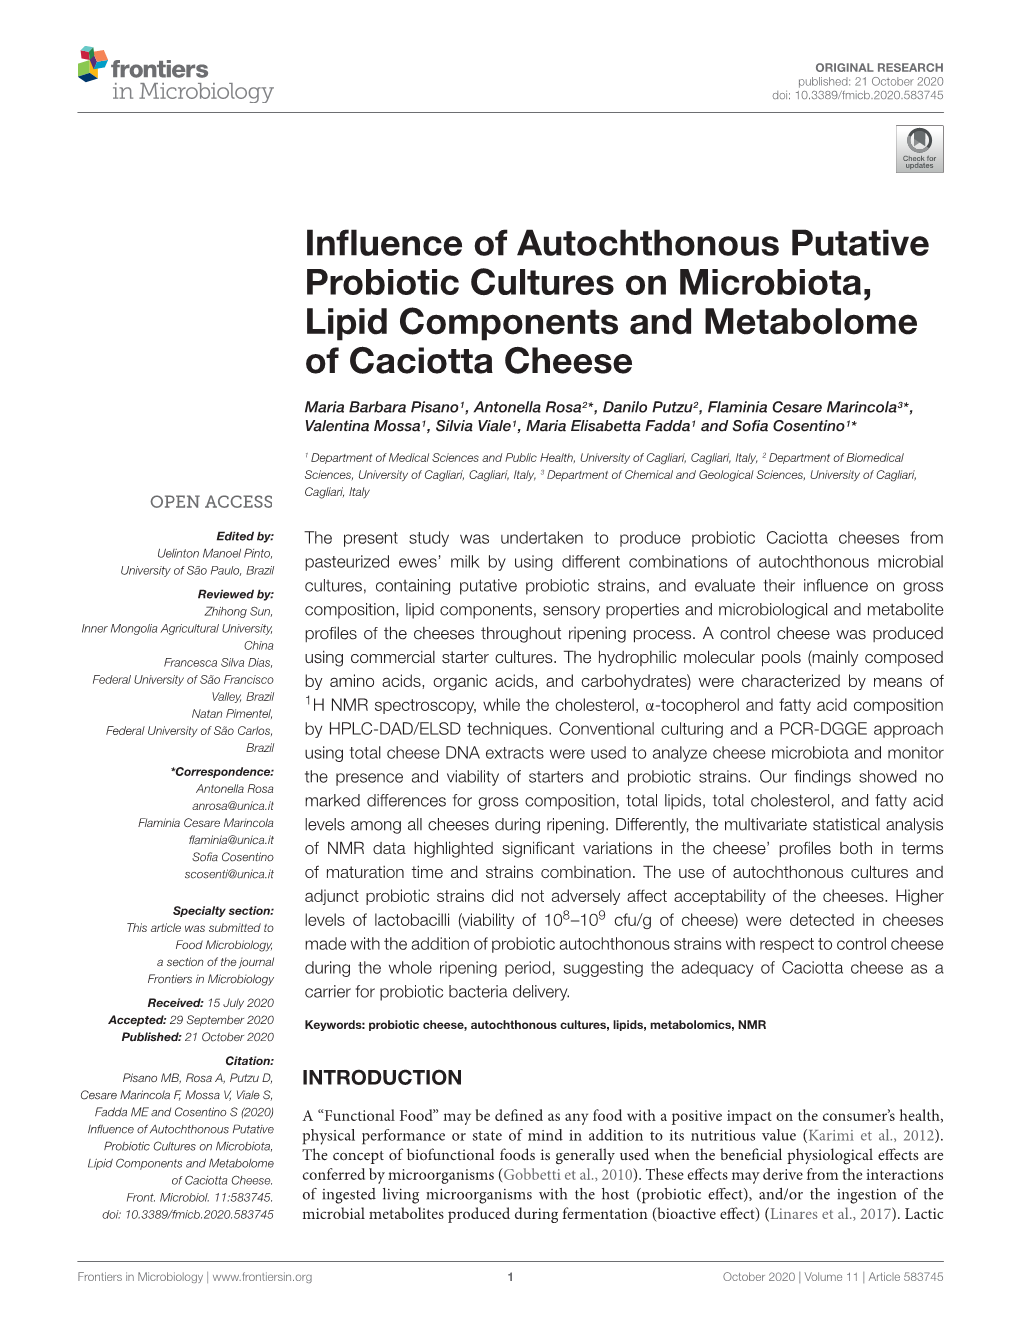 Influence of Autochthonous Putative Probiotic Cultures on Microbiota